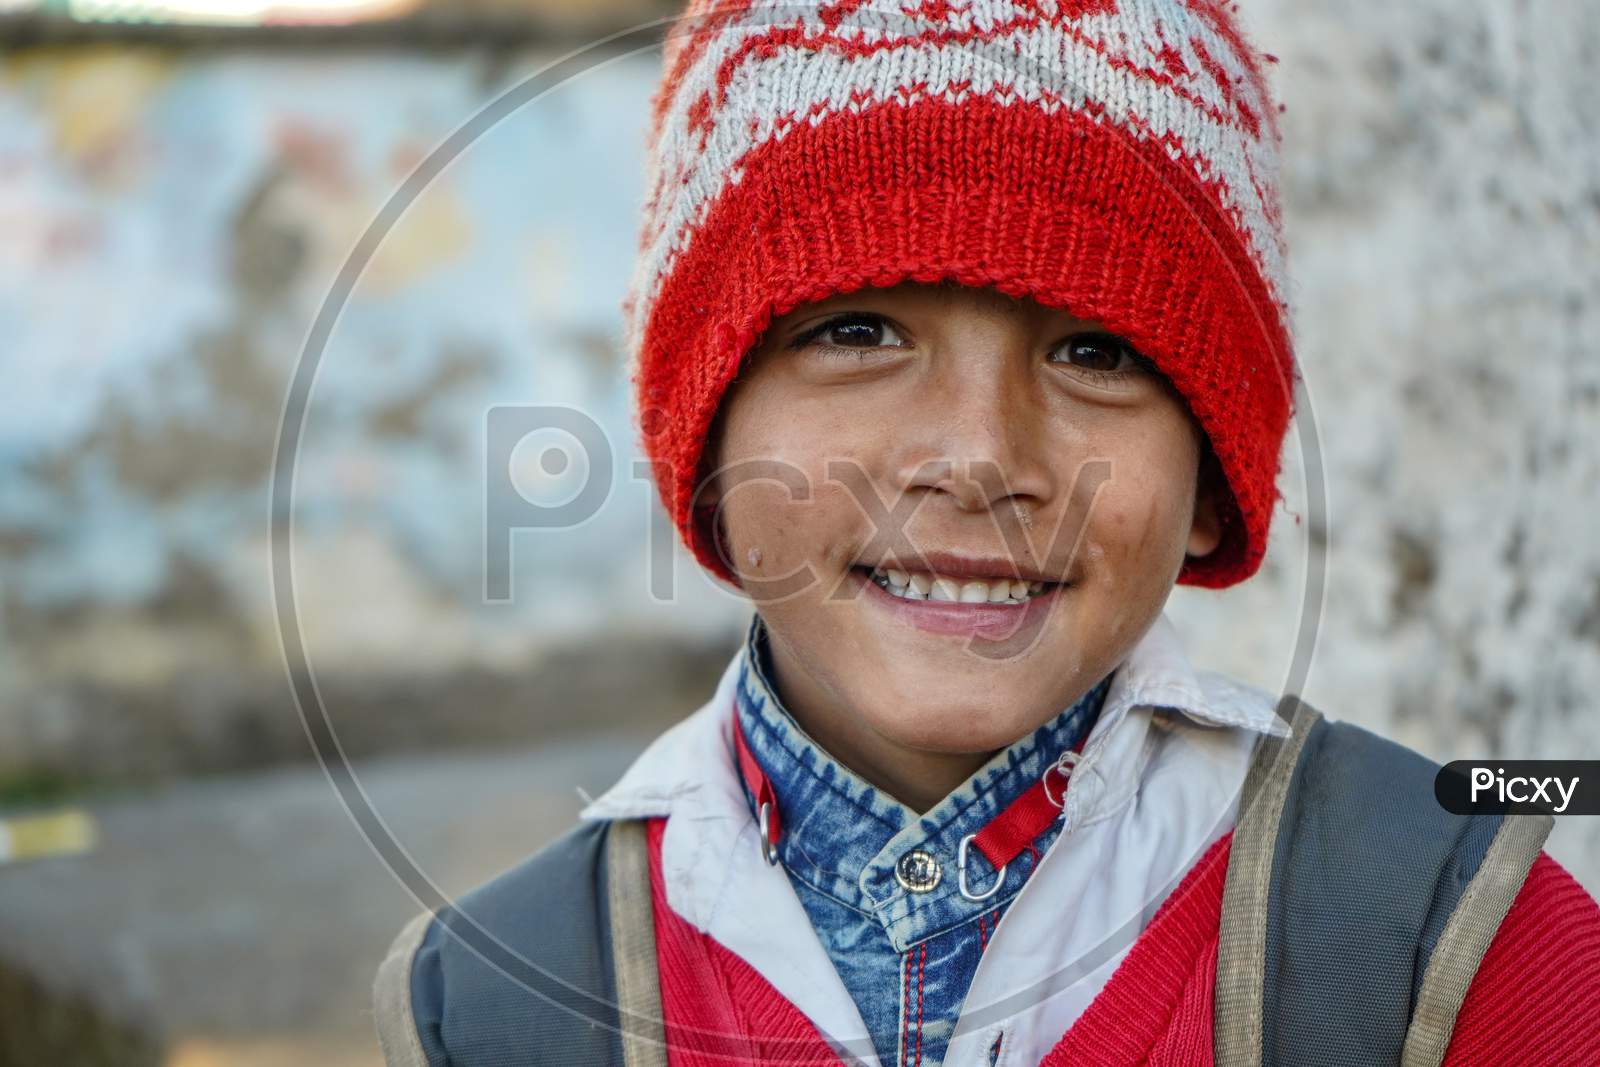 Almora, Uttrakhand / India- May 25 2020 : Portrait Of A Young Kid Smiling Wearing Red Cap And Red Uniform Of School